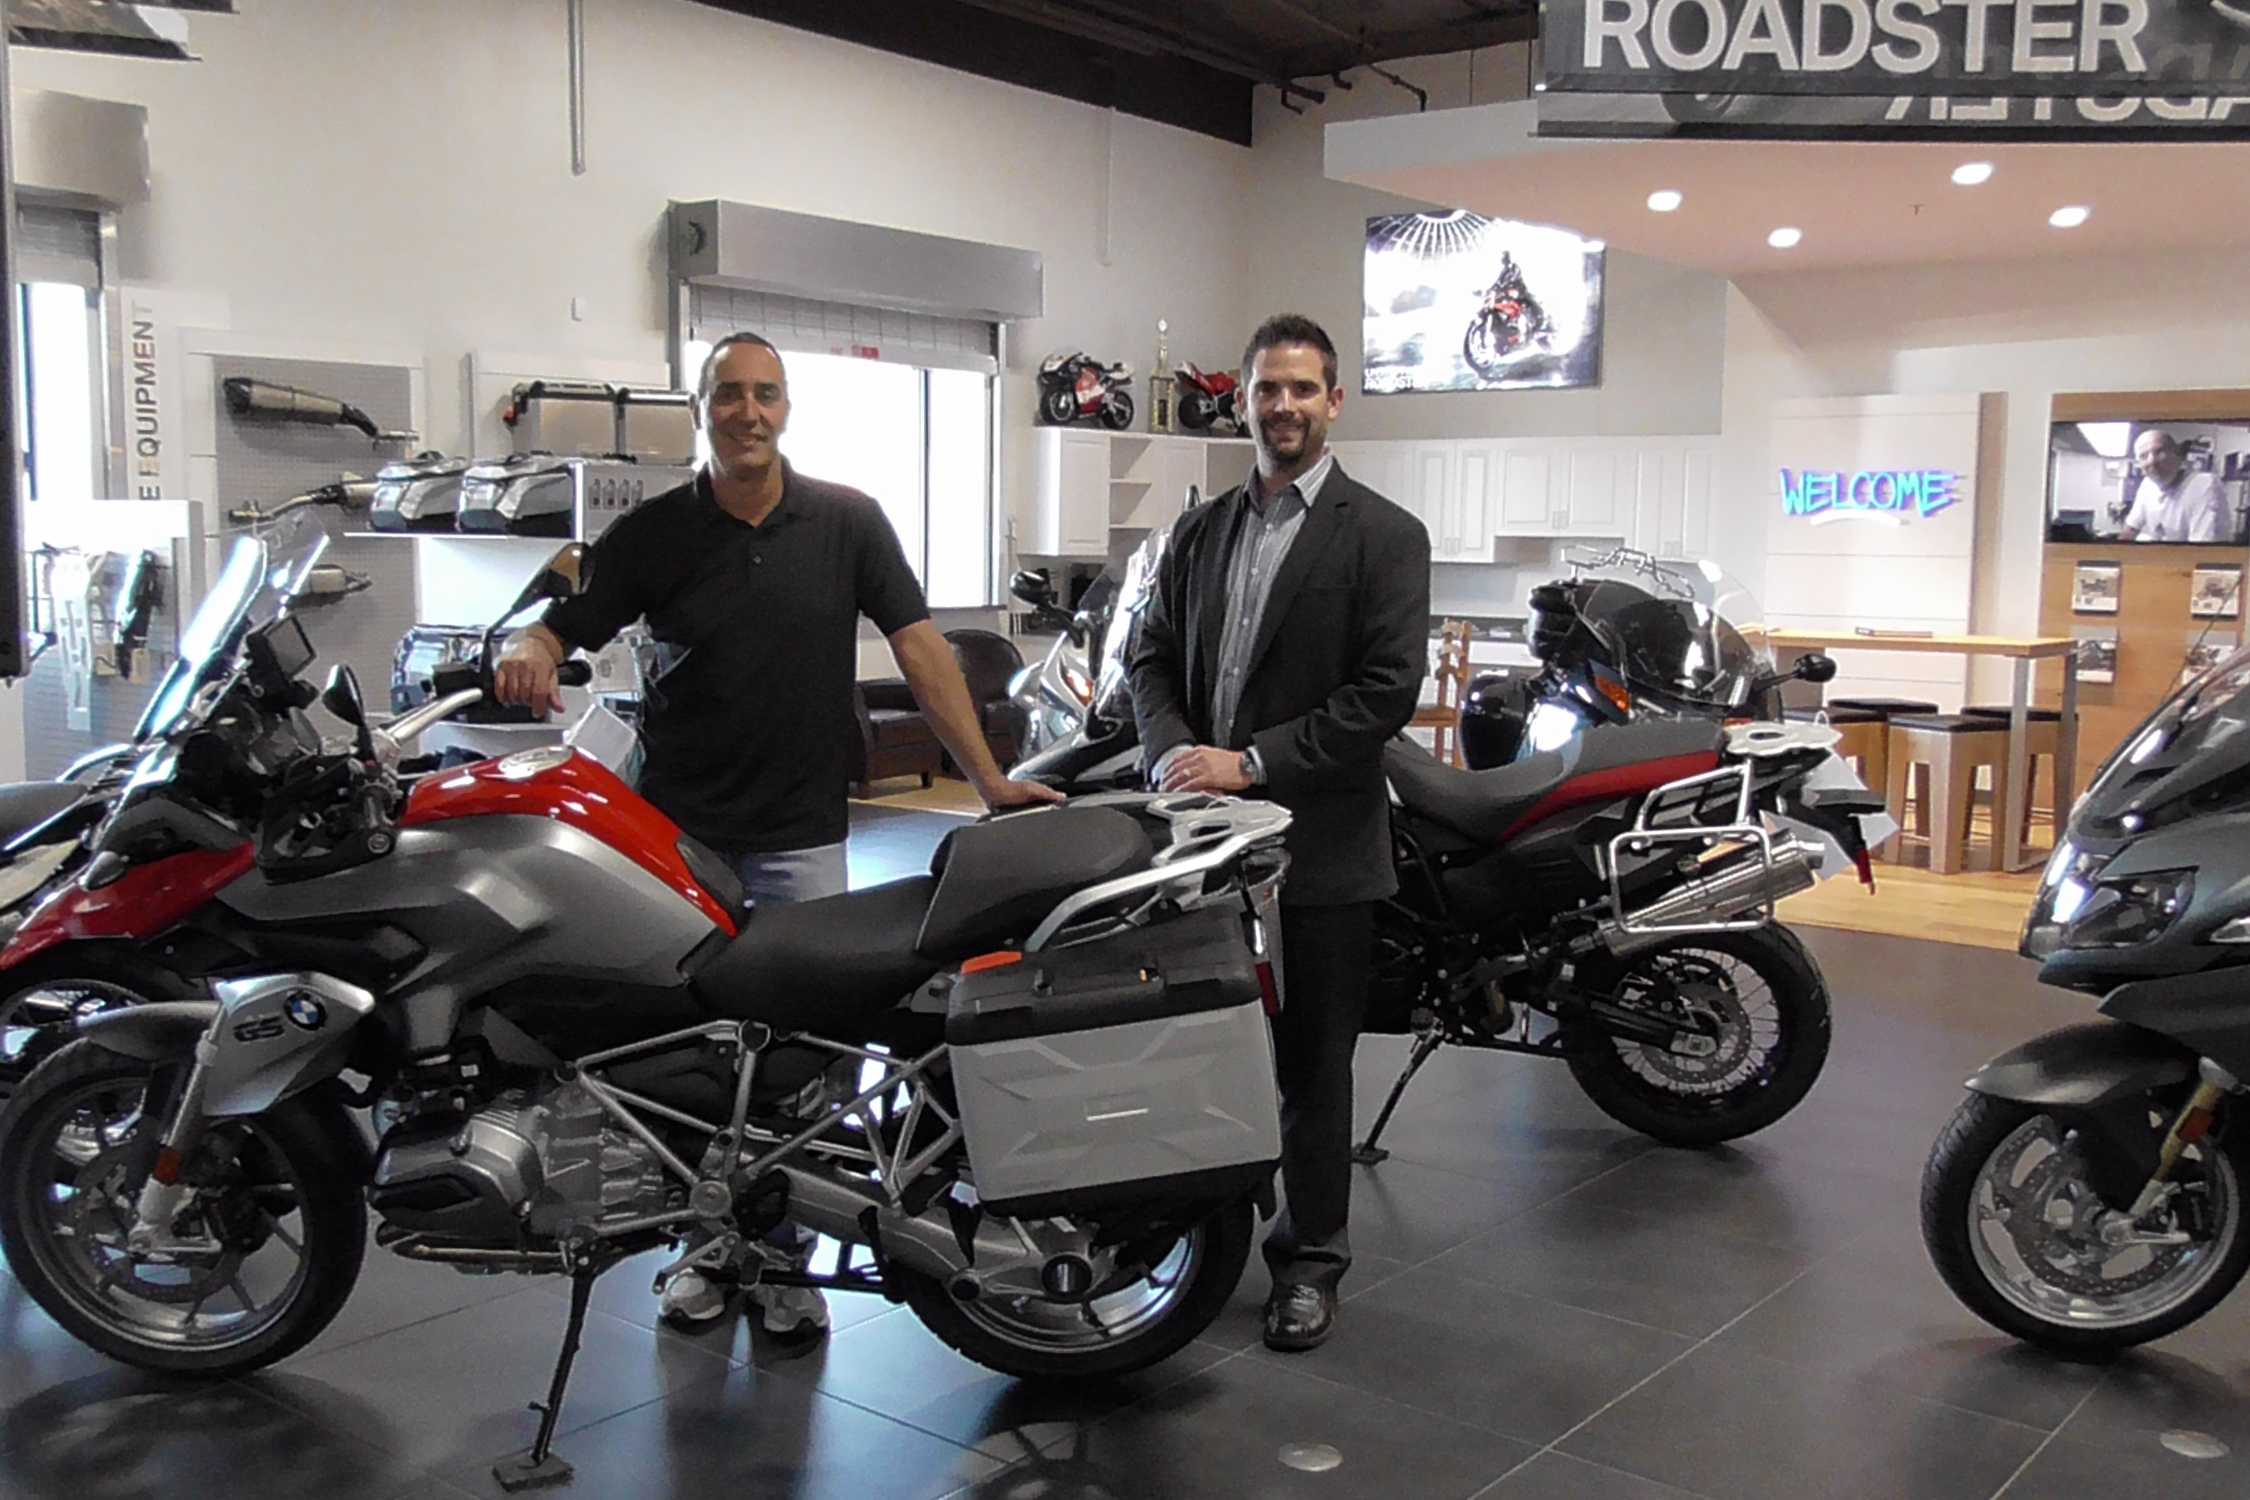 BMW Motorrad USA Welcomes BMW Motorcycles of Denton to Dealer Network